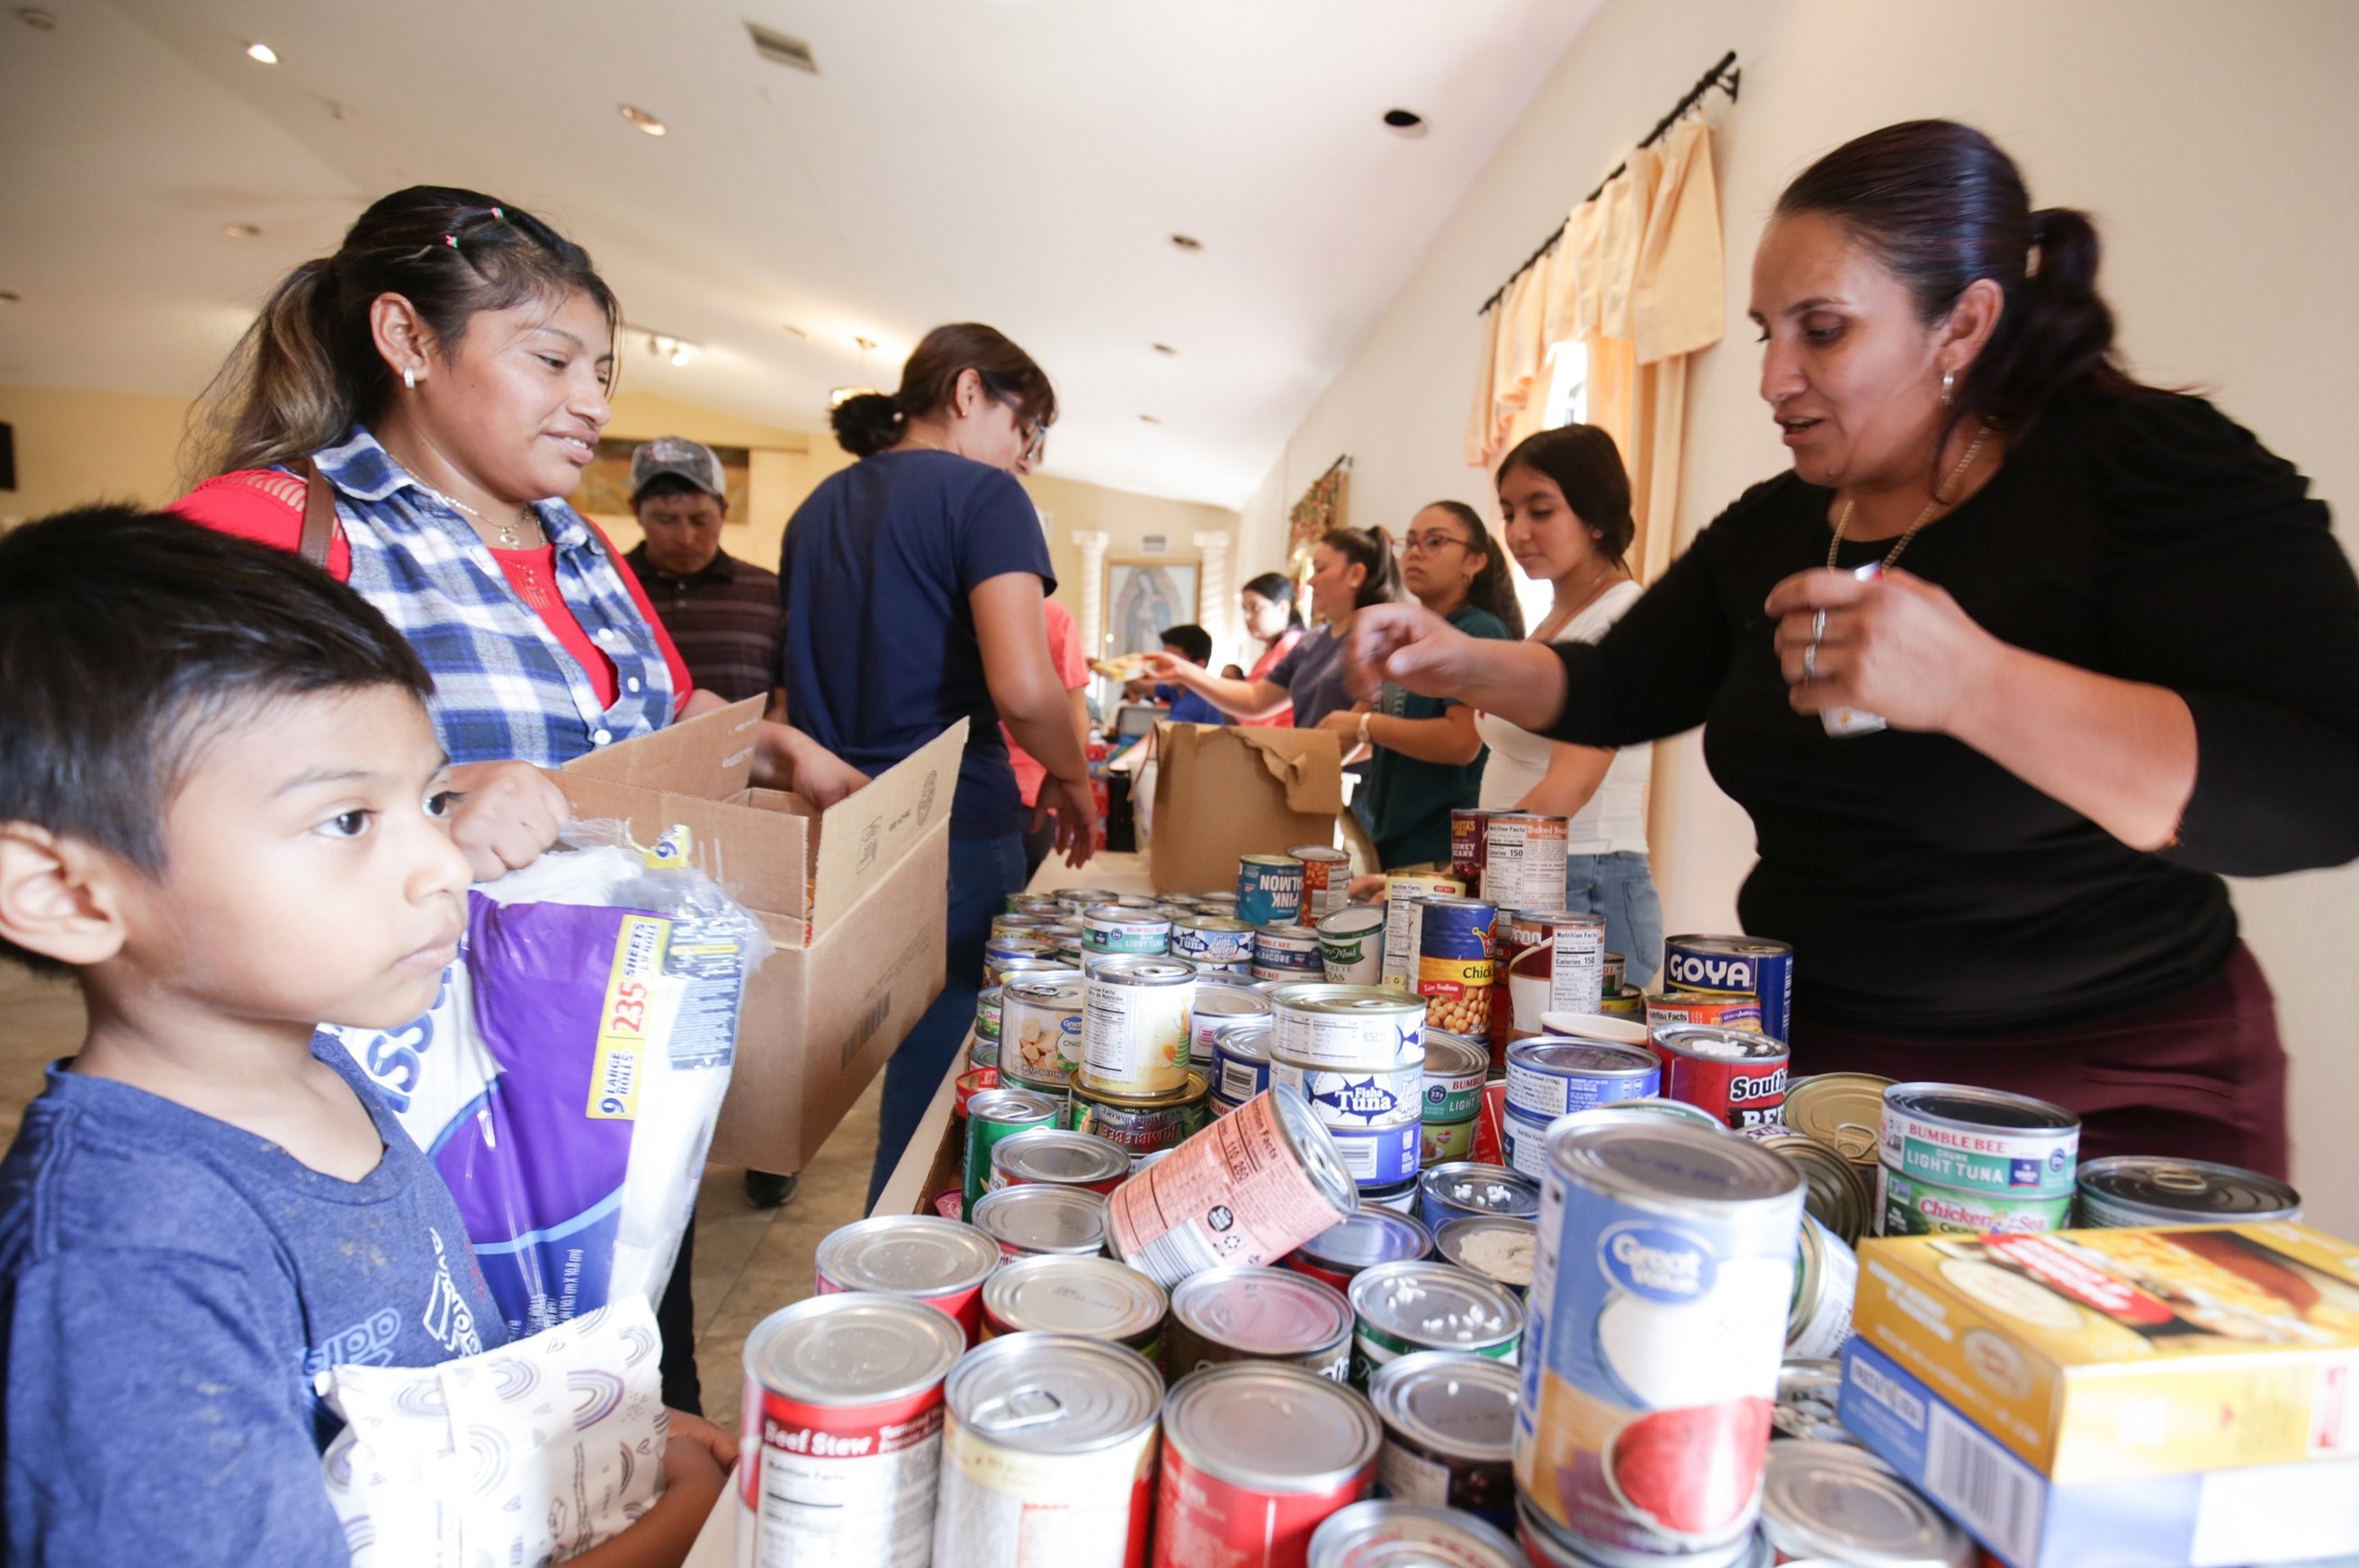 Volunteers and members of the local community distribute food at Jesús Obrero (Jesus the Worker) Parish in Fort Meyers, Florida, on Oct. 4 amid the aftermath of Hurricane Ian. (CNS/Tom Tracy)